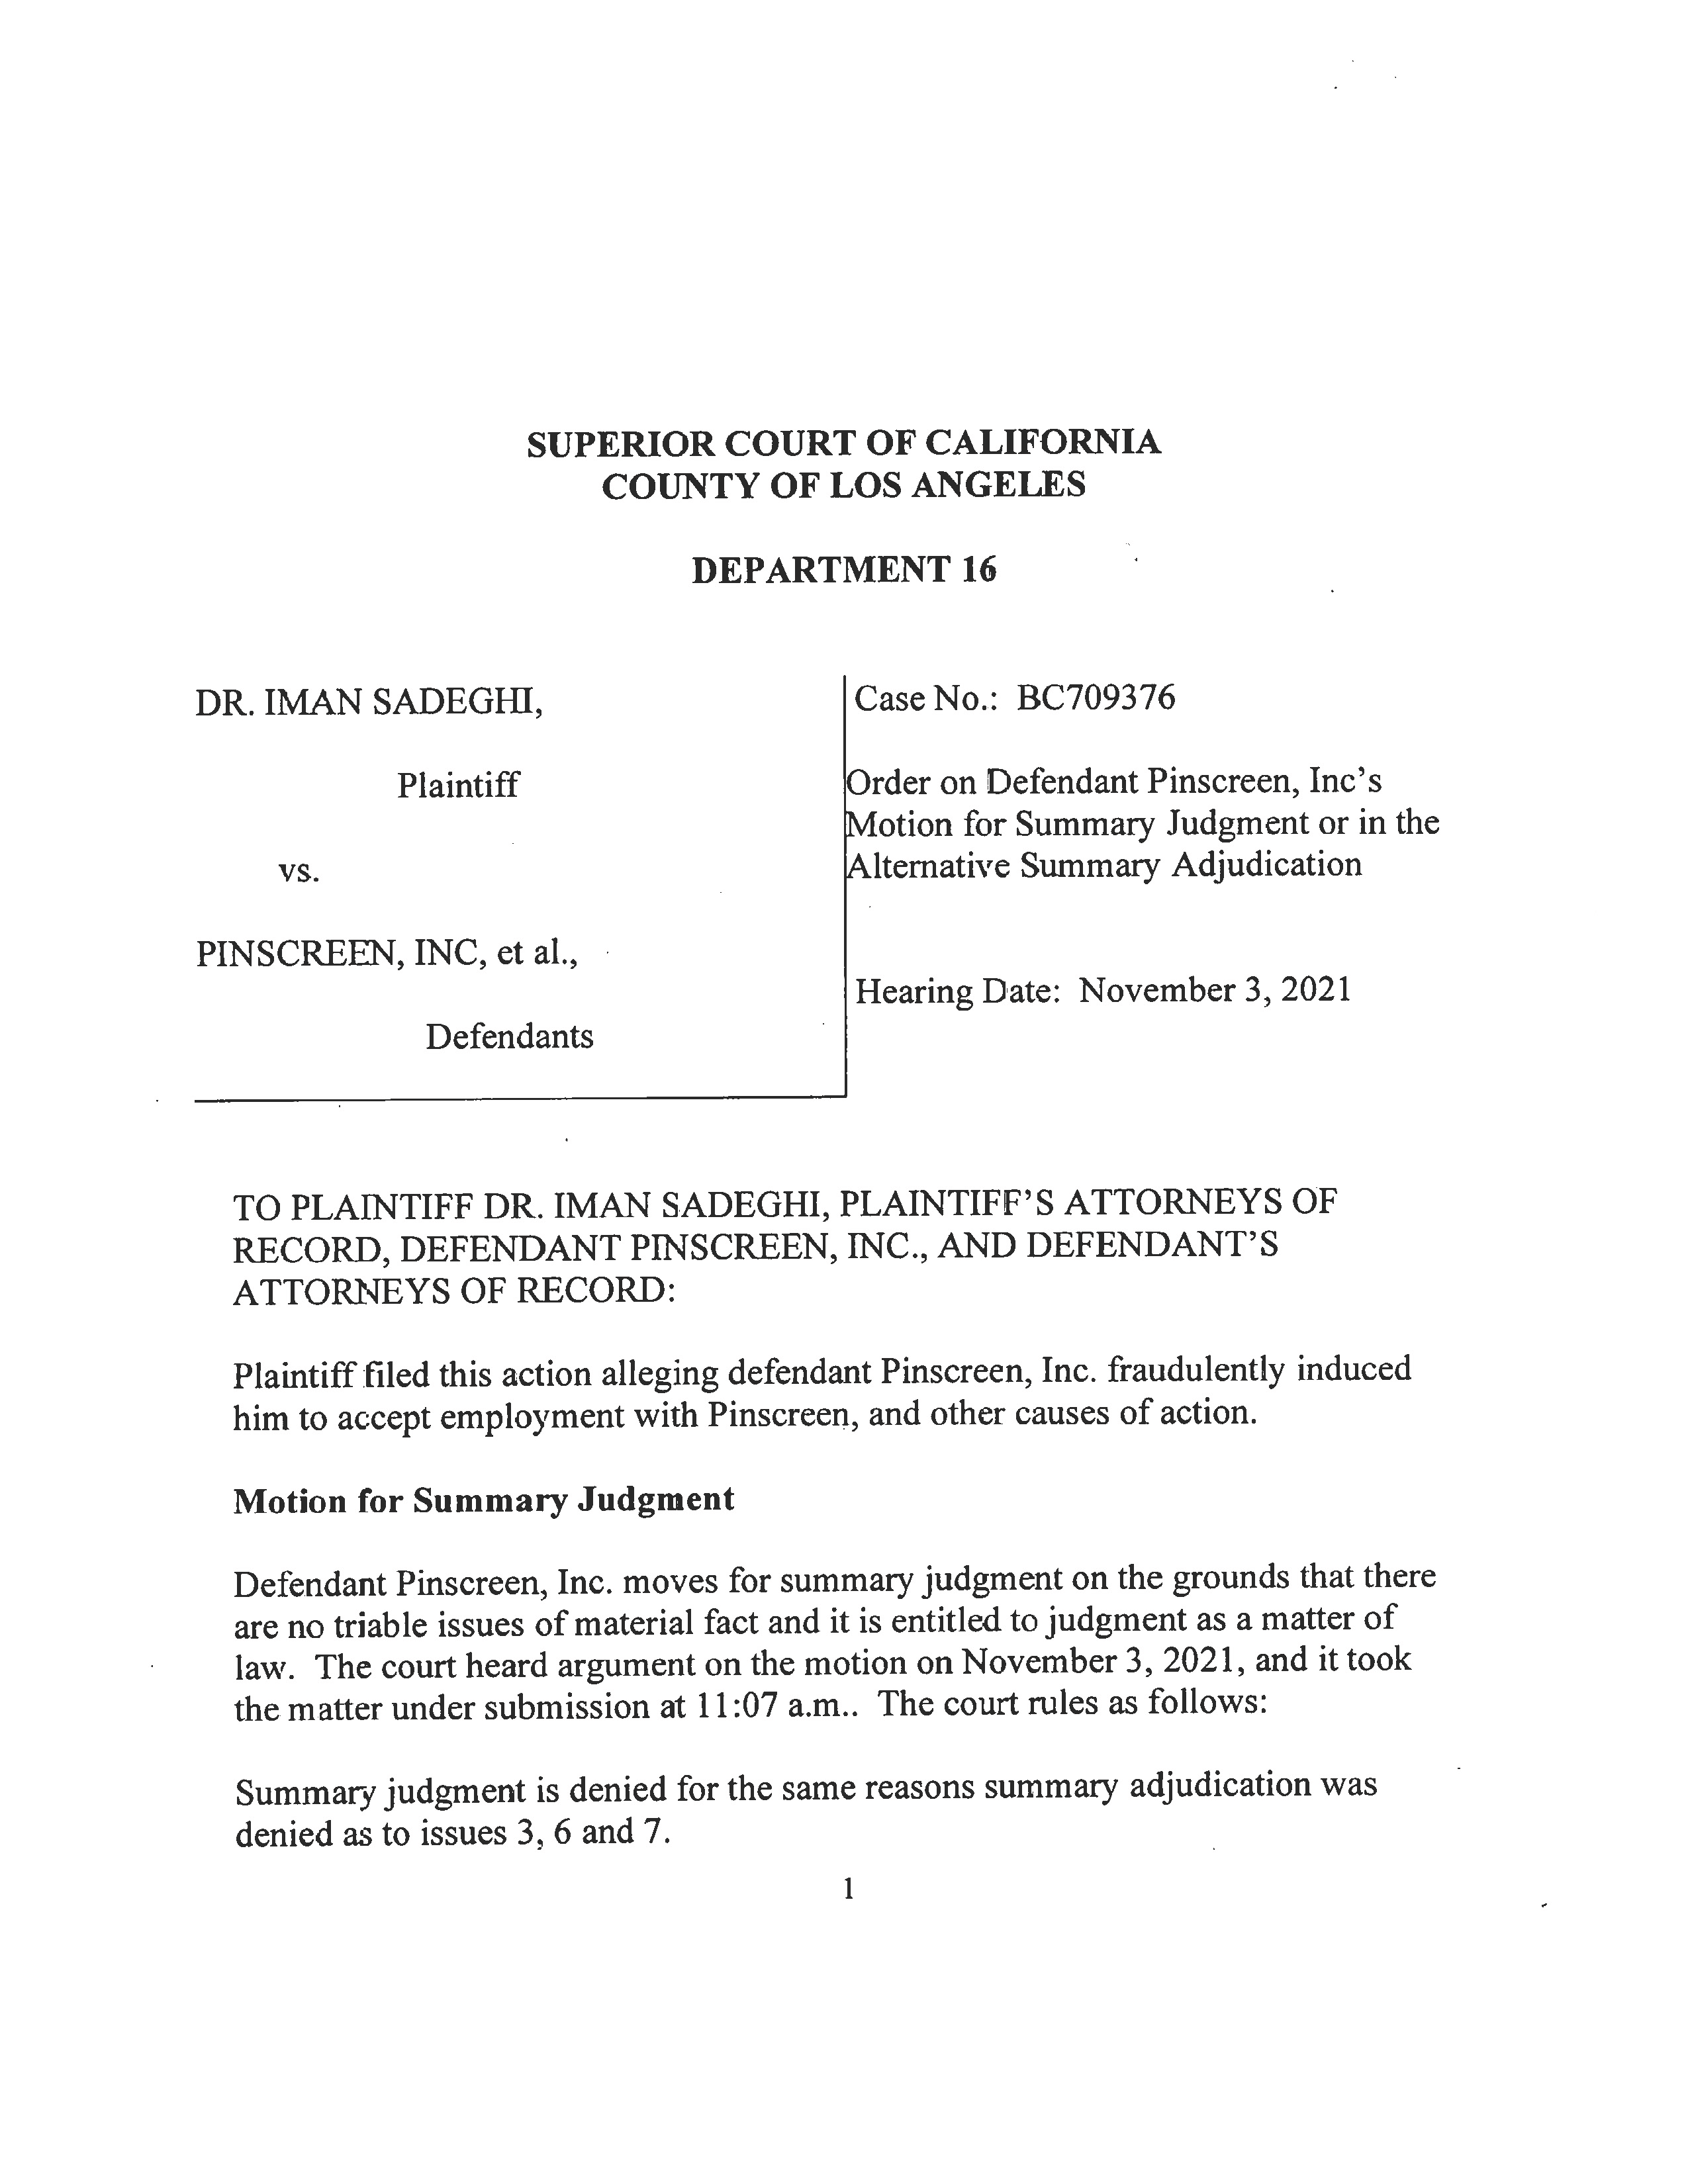 Court Ruling on Pinscreen's and Hao Li's Motion for Summary Judgment - Full Page 1